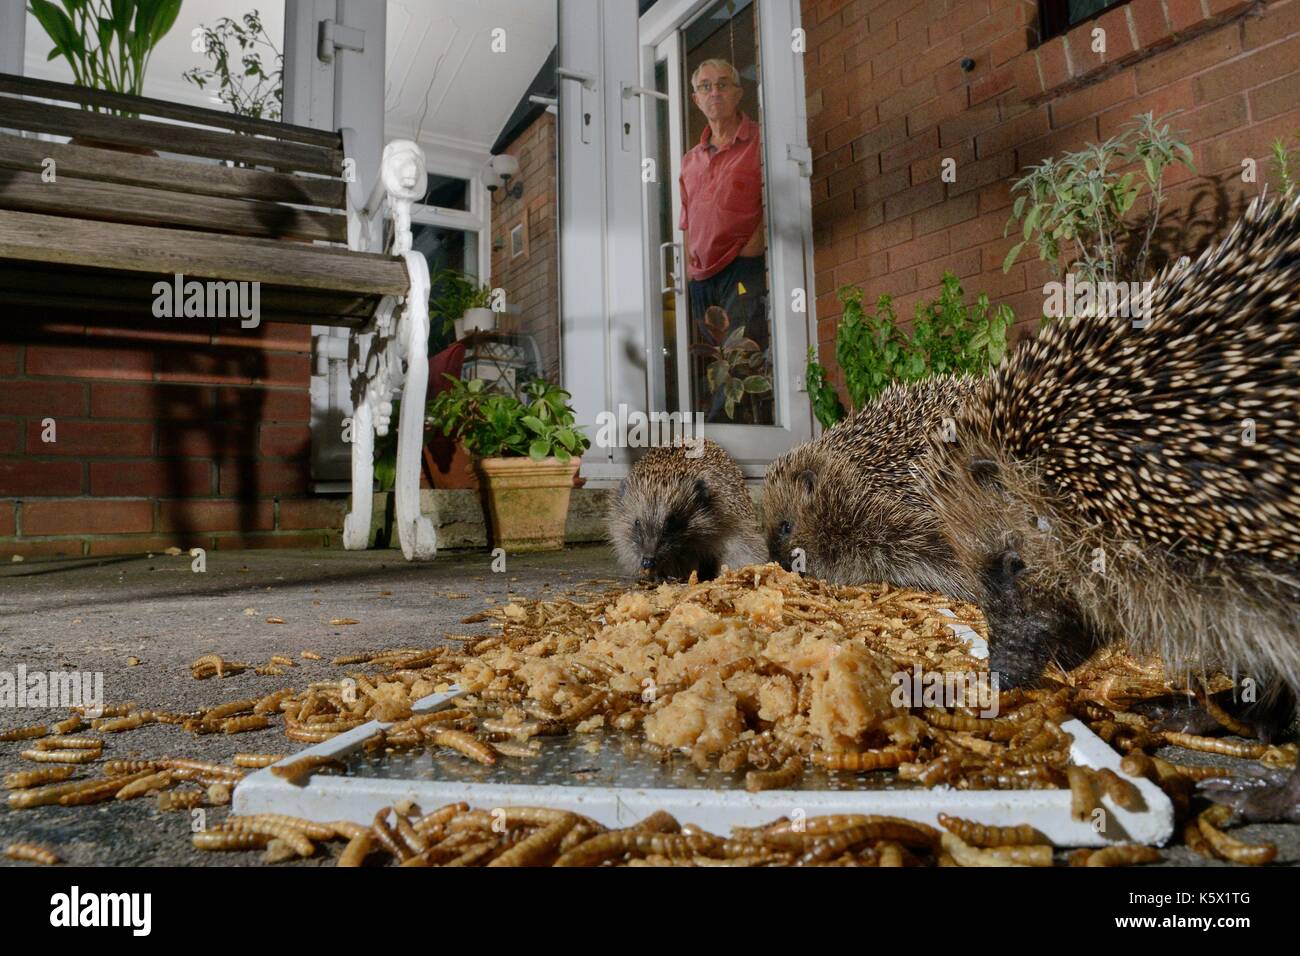 Three Hedgehogs (Erinaceus europaeus) feeding on mealworms and oatmeal left out for them on a patio, watched by home owner, Chippenham, Wiltshire, UK, Stock Photo